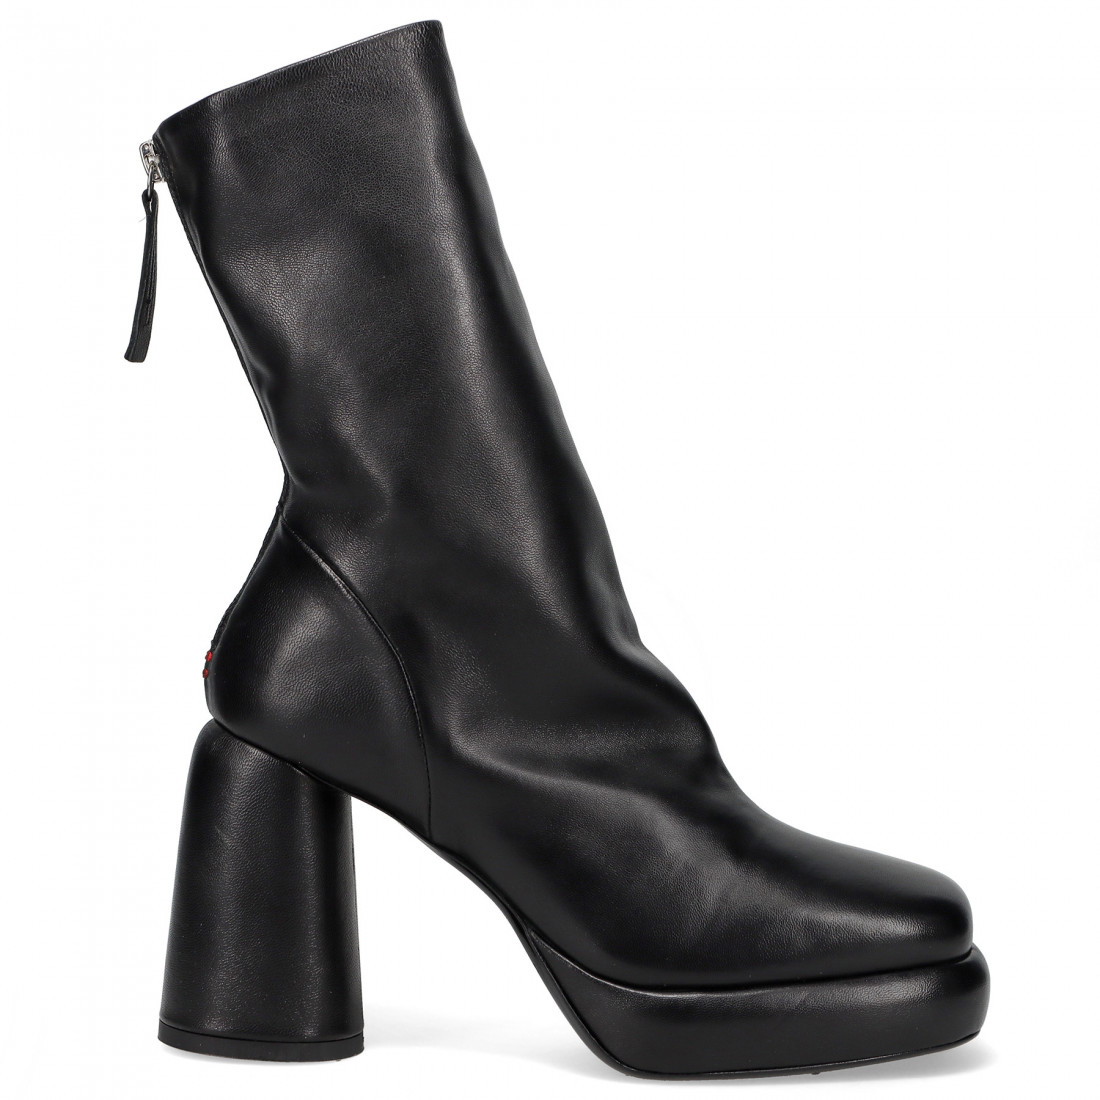 Halmanera Elsa 06 ankle boot in black leather with high heel